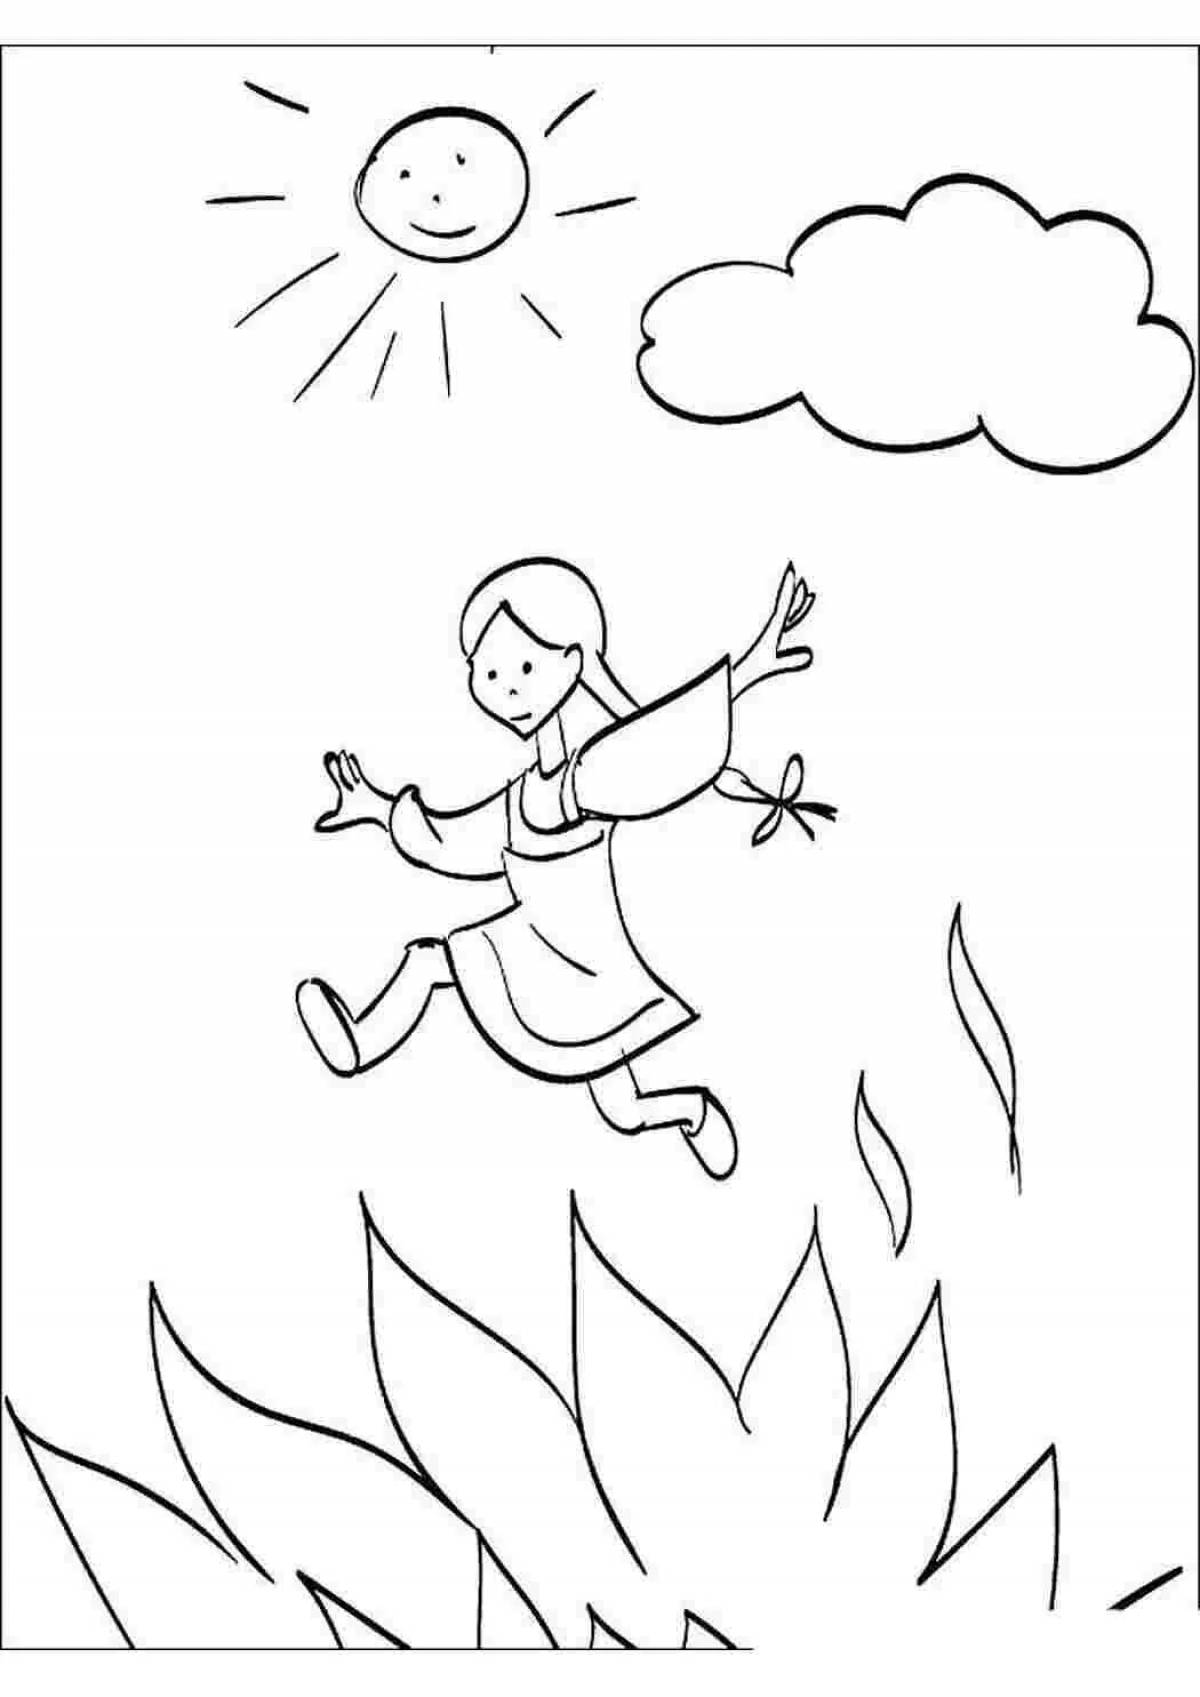 Splendid jumping fire coloring pages for kids